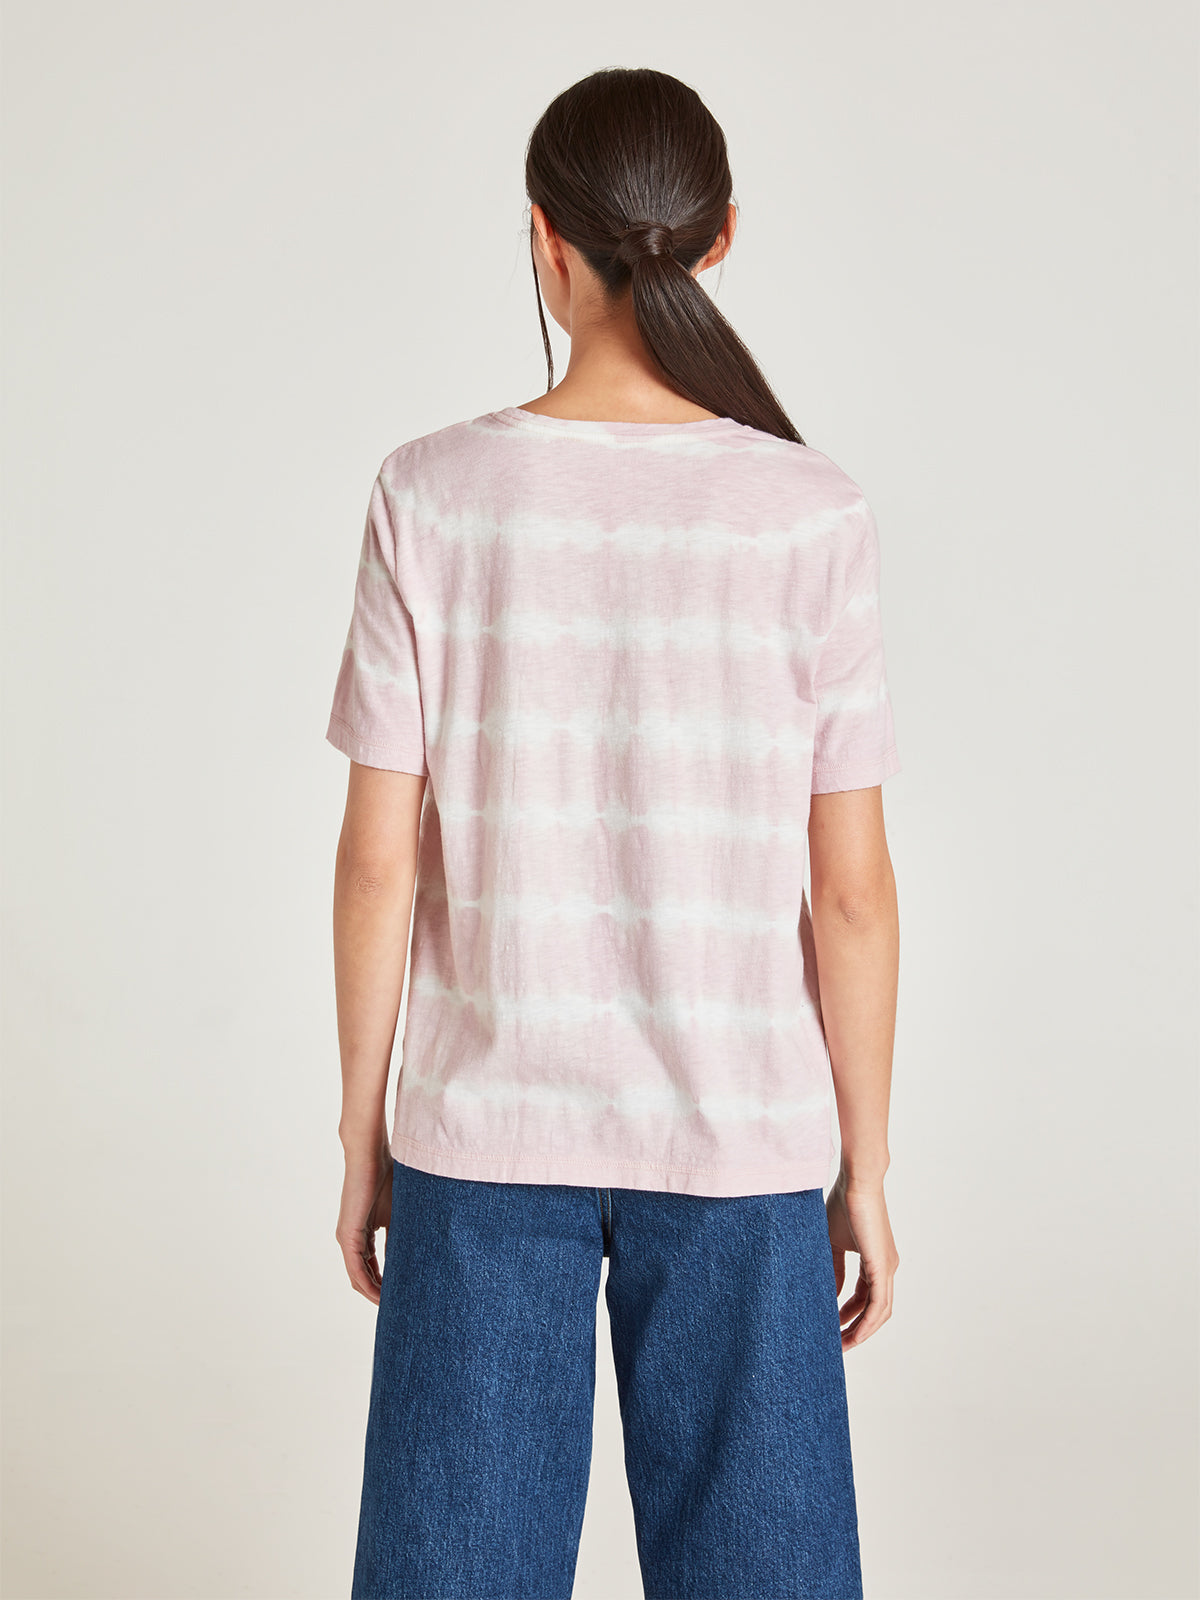 Fairtrade Organic Cotton Tie Dyed T-Shirt - Orchid Pink